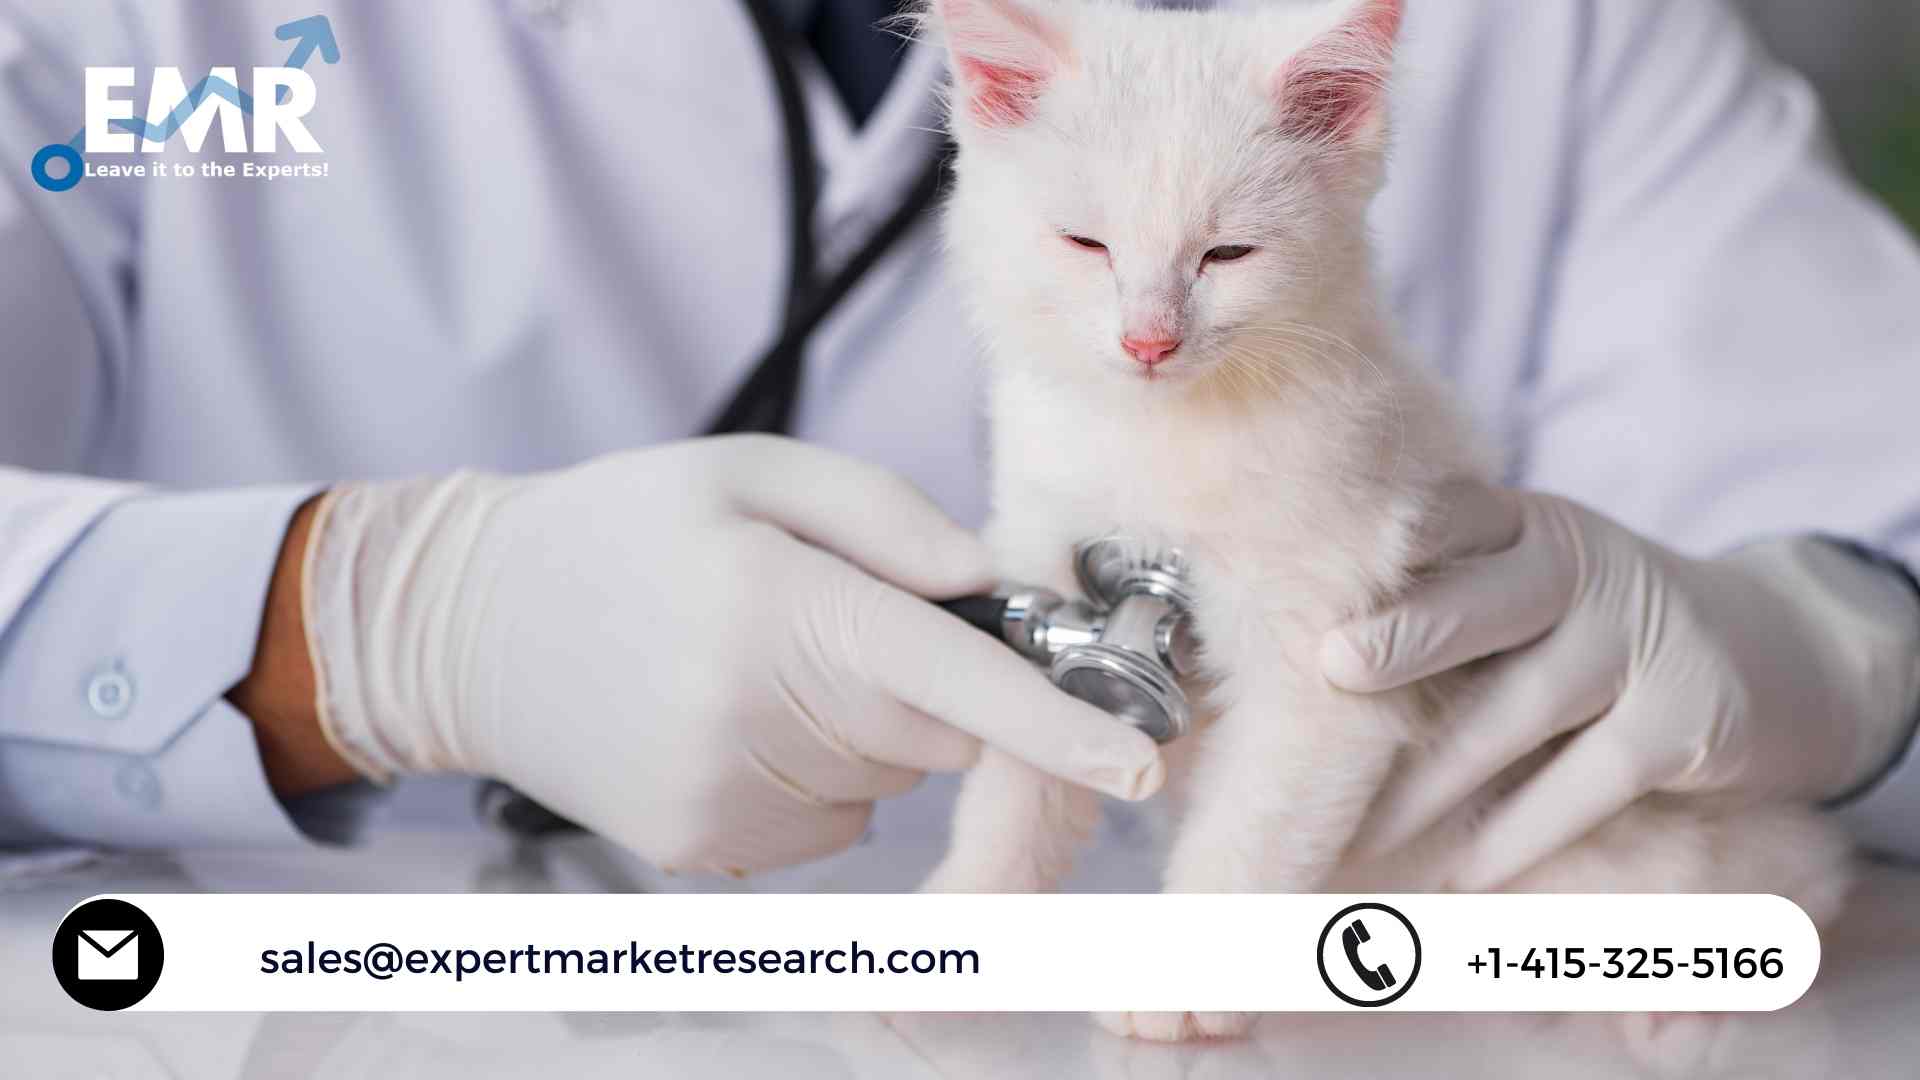 Global Veterinary Healthcare Market Size, Share, Trends, Growth, Analysis, Key Players, Report, Forecast 2022-2027 | EMR Inc.